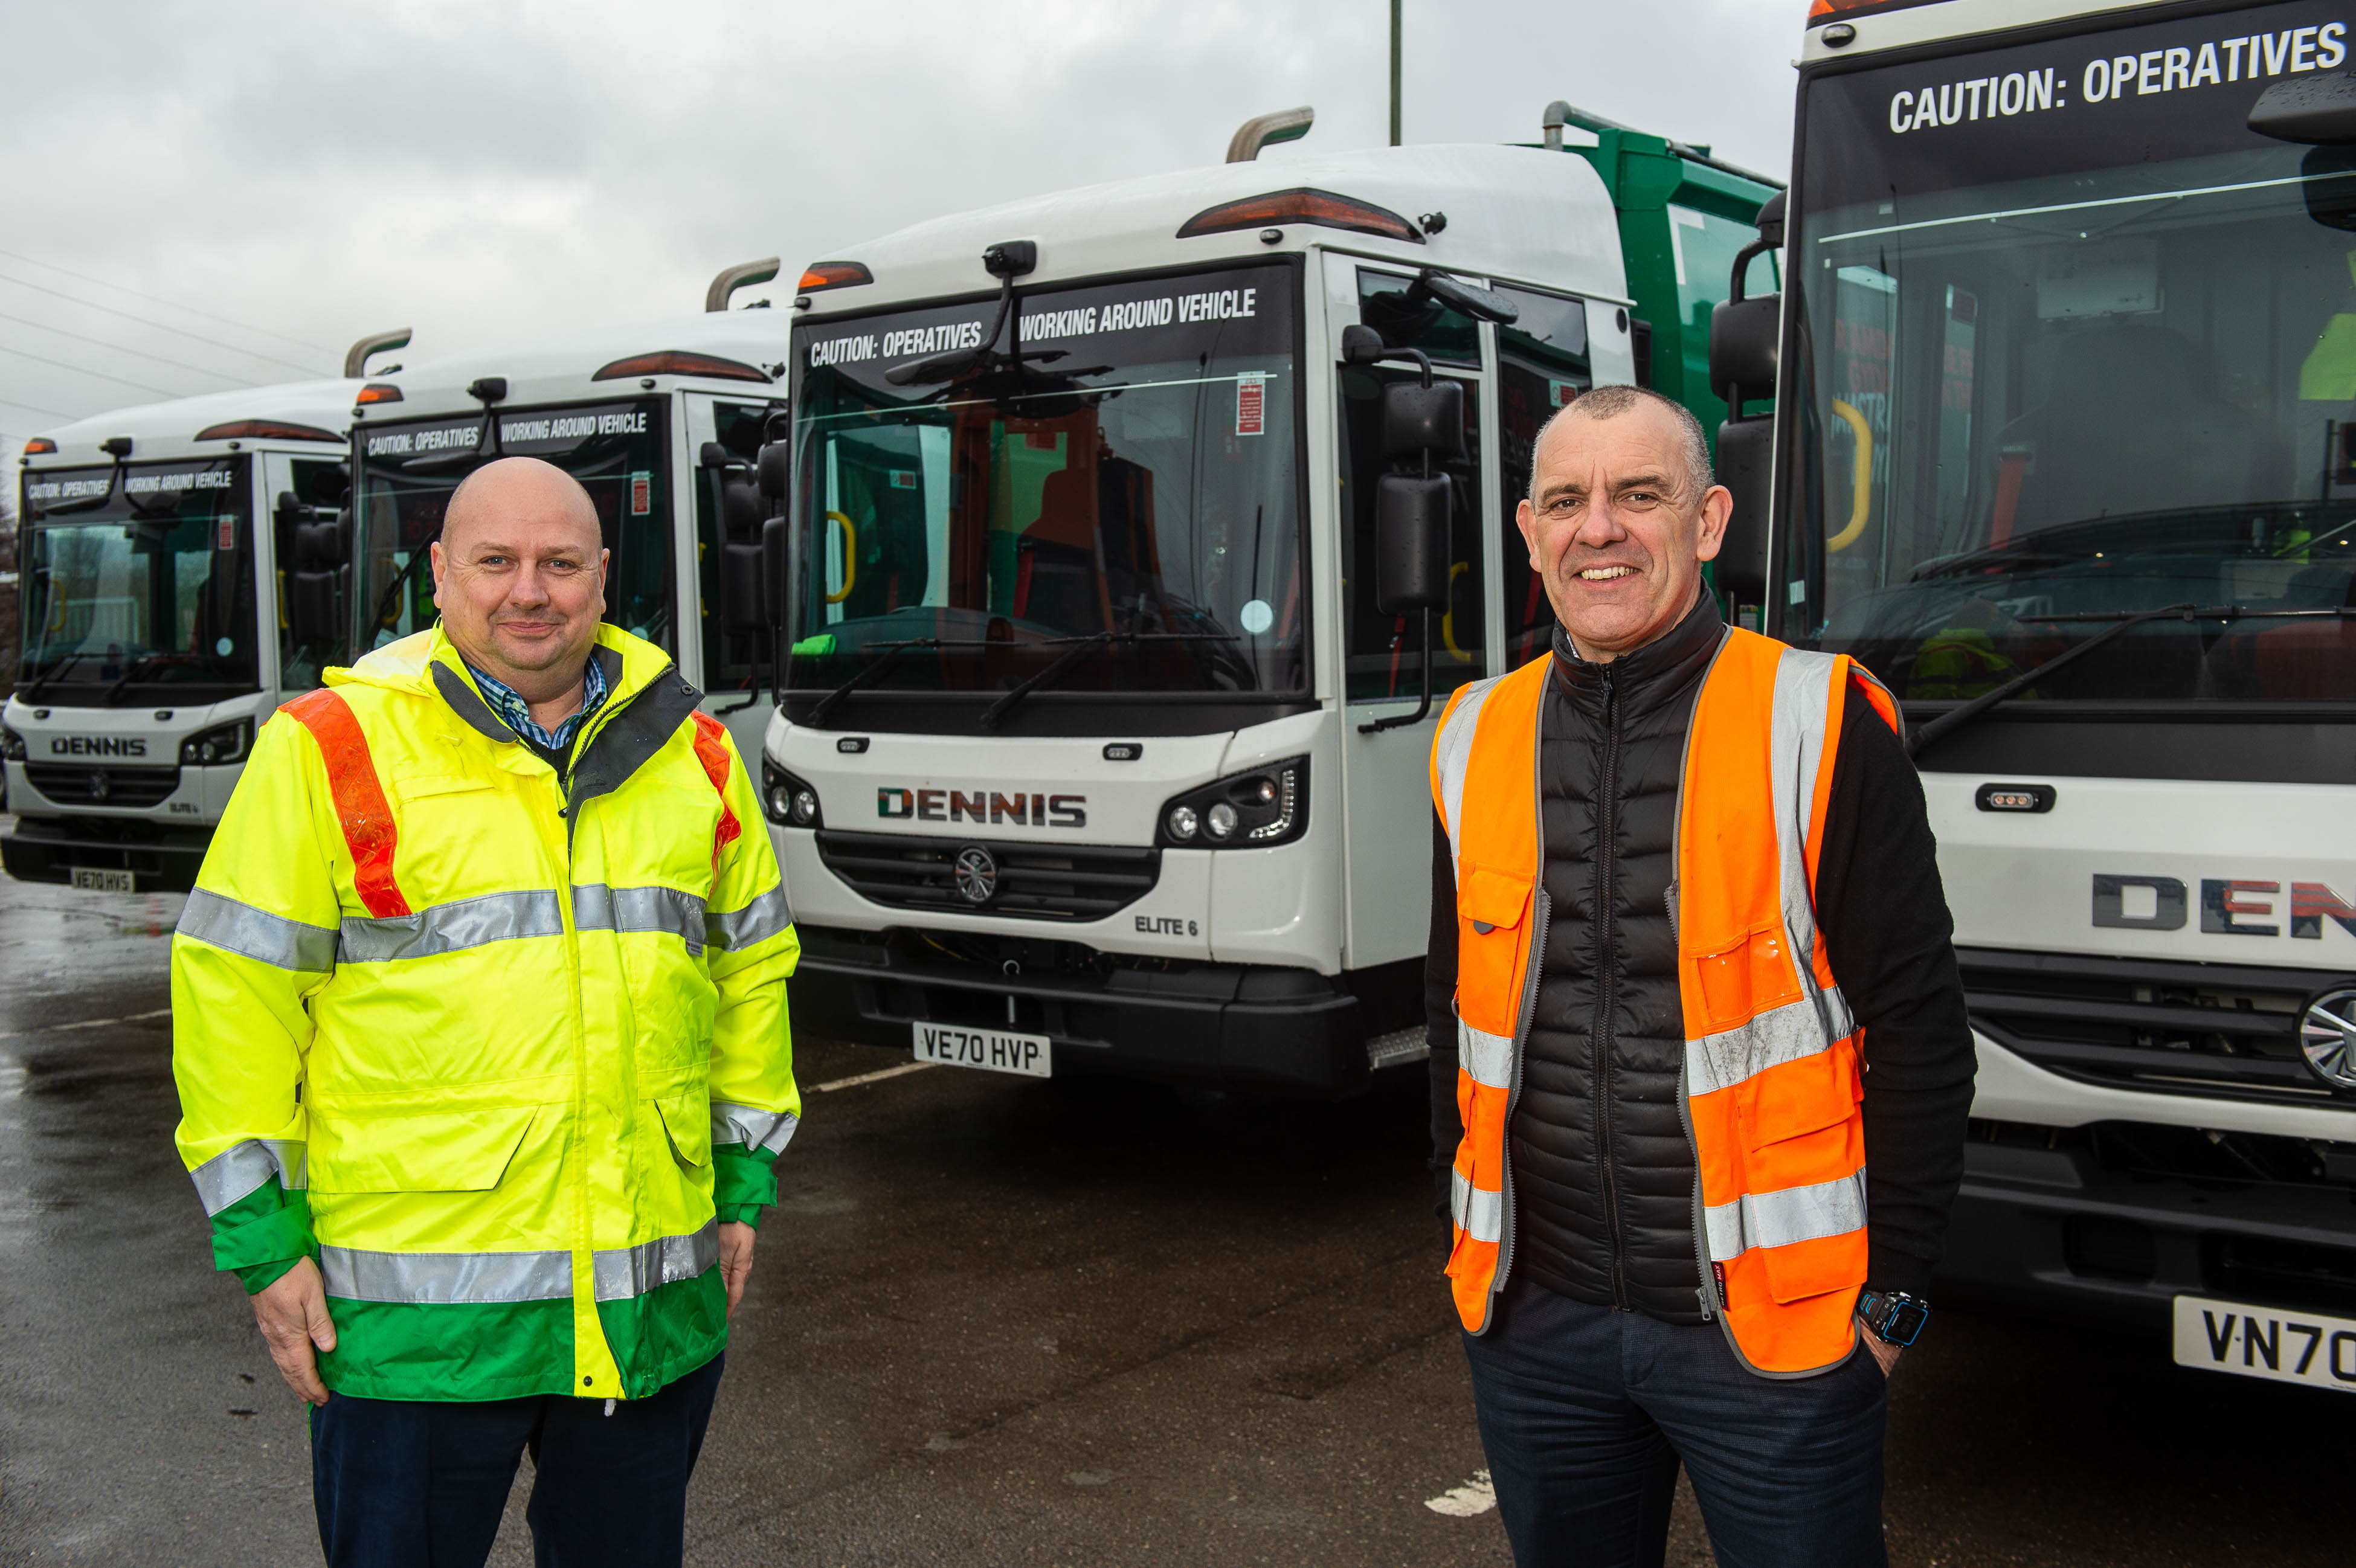 Over 300 vehicles delivered to Caerphilly County Borough Council